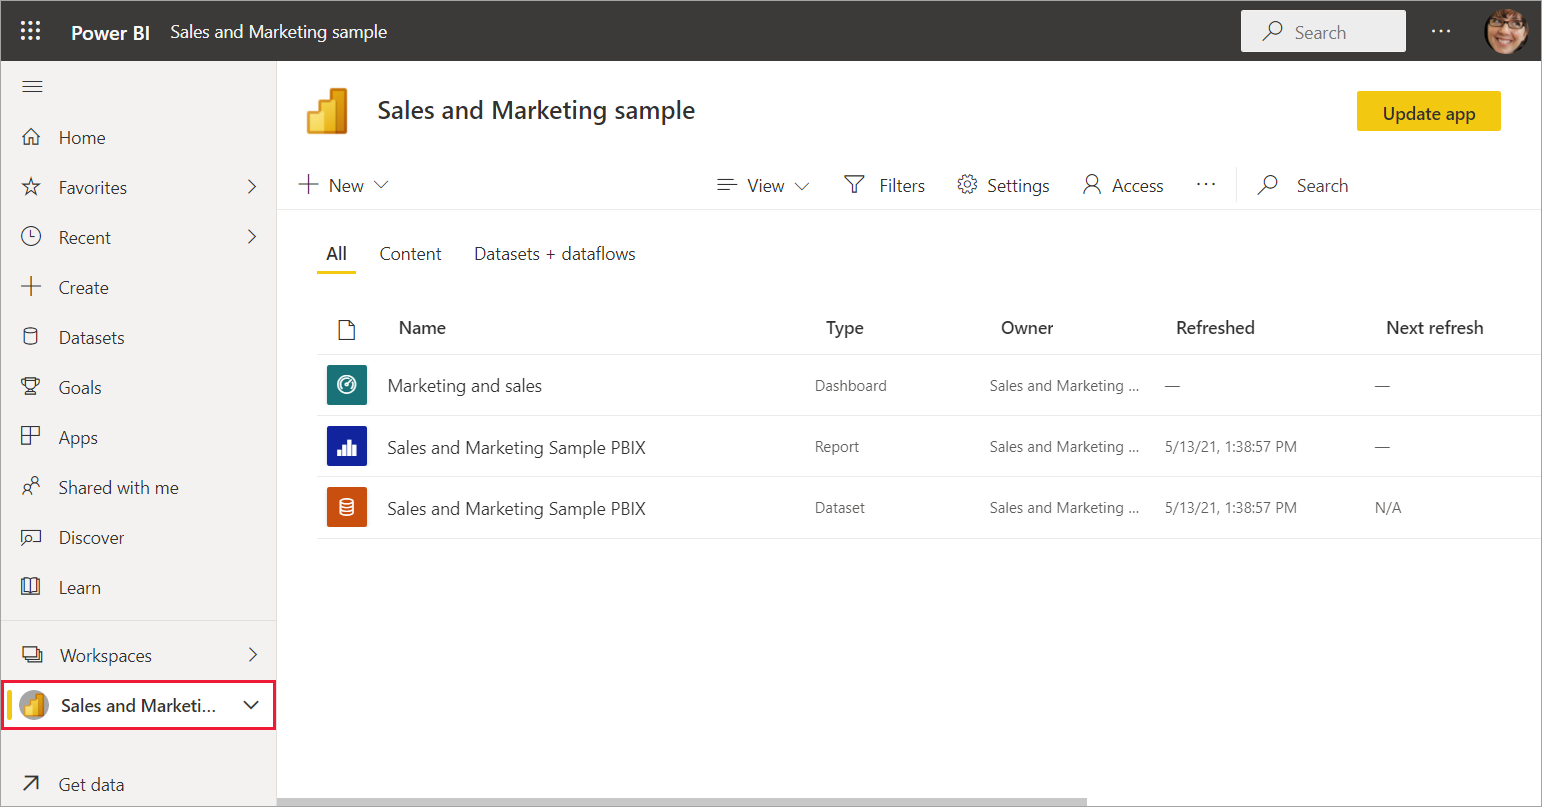 Screenshot of the Sales and Marketing workspace showing one report and one semantic model.